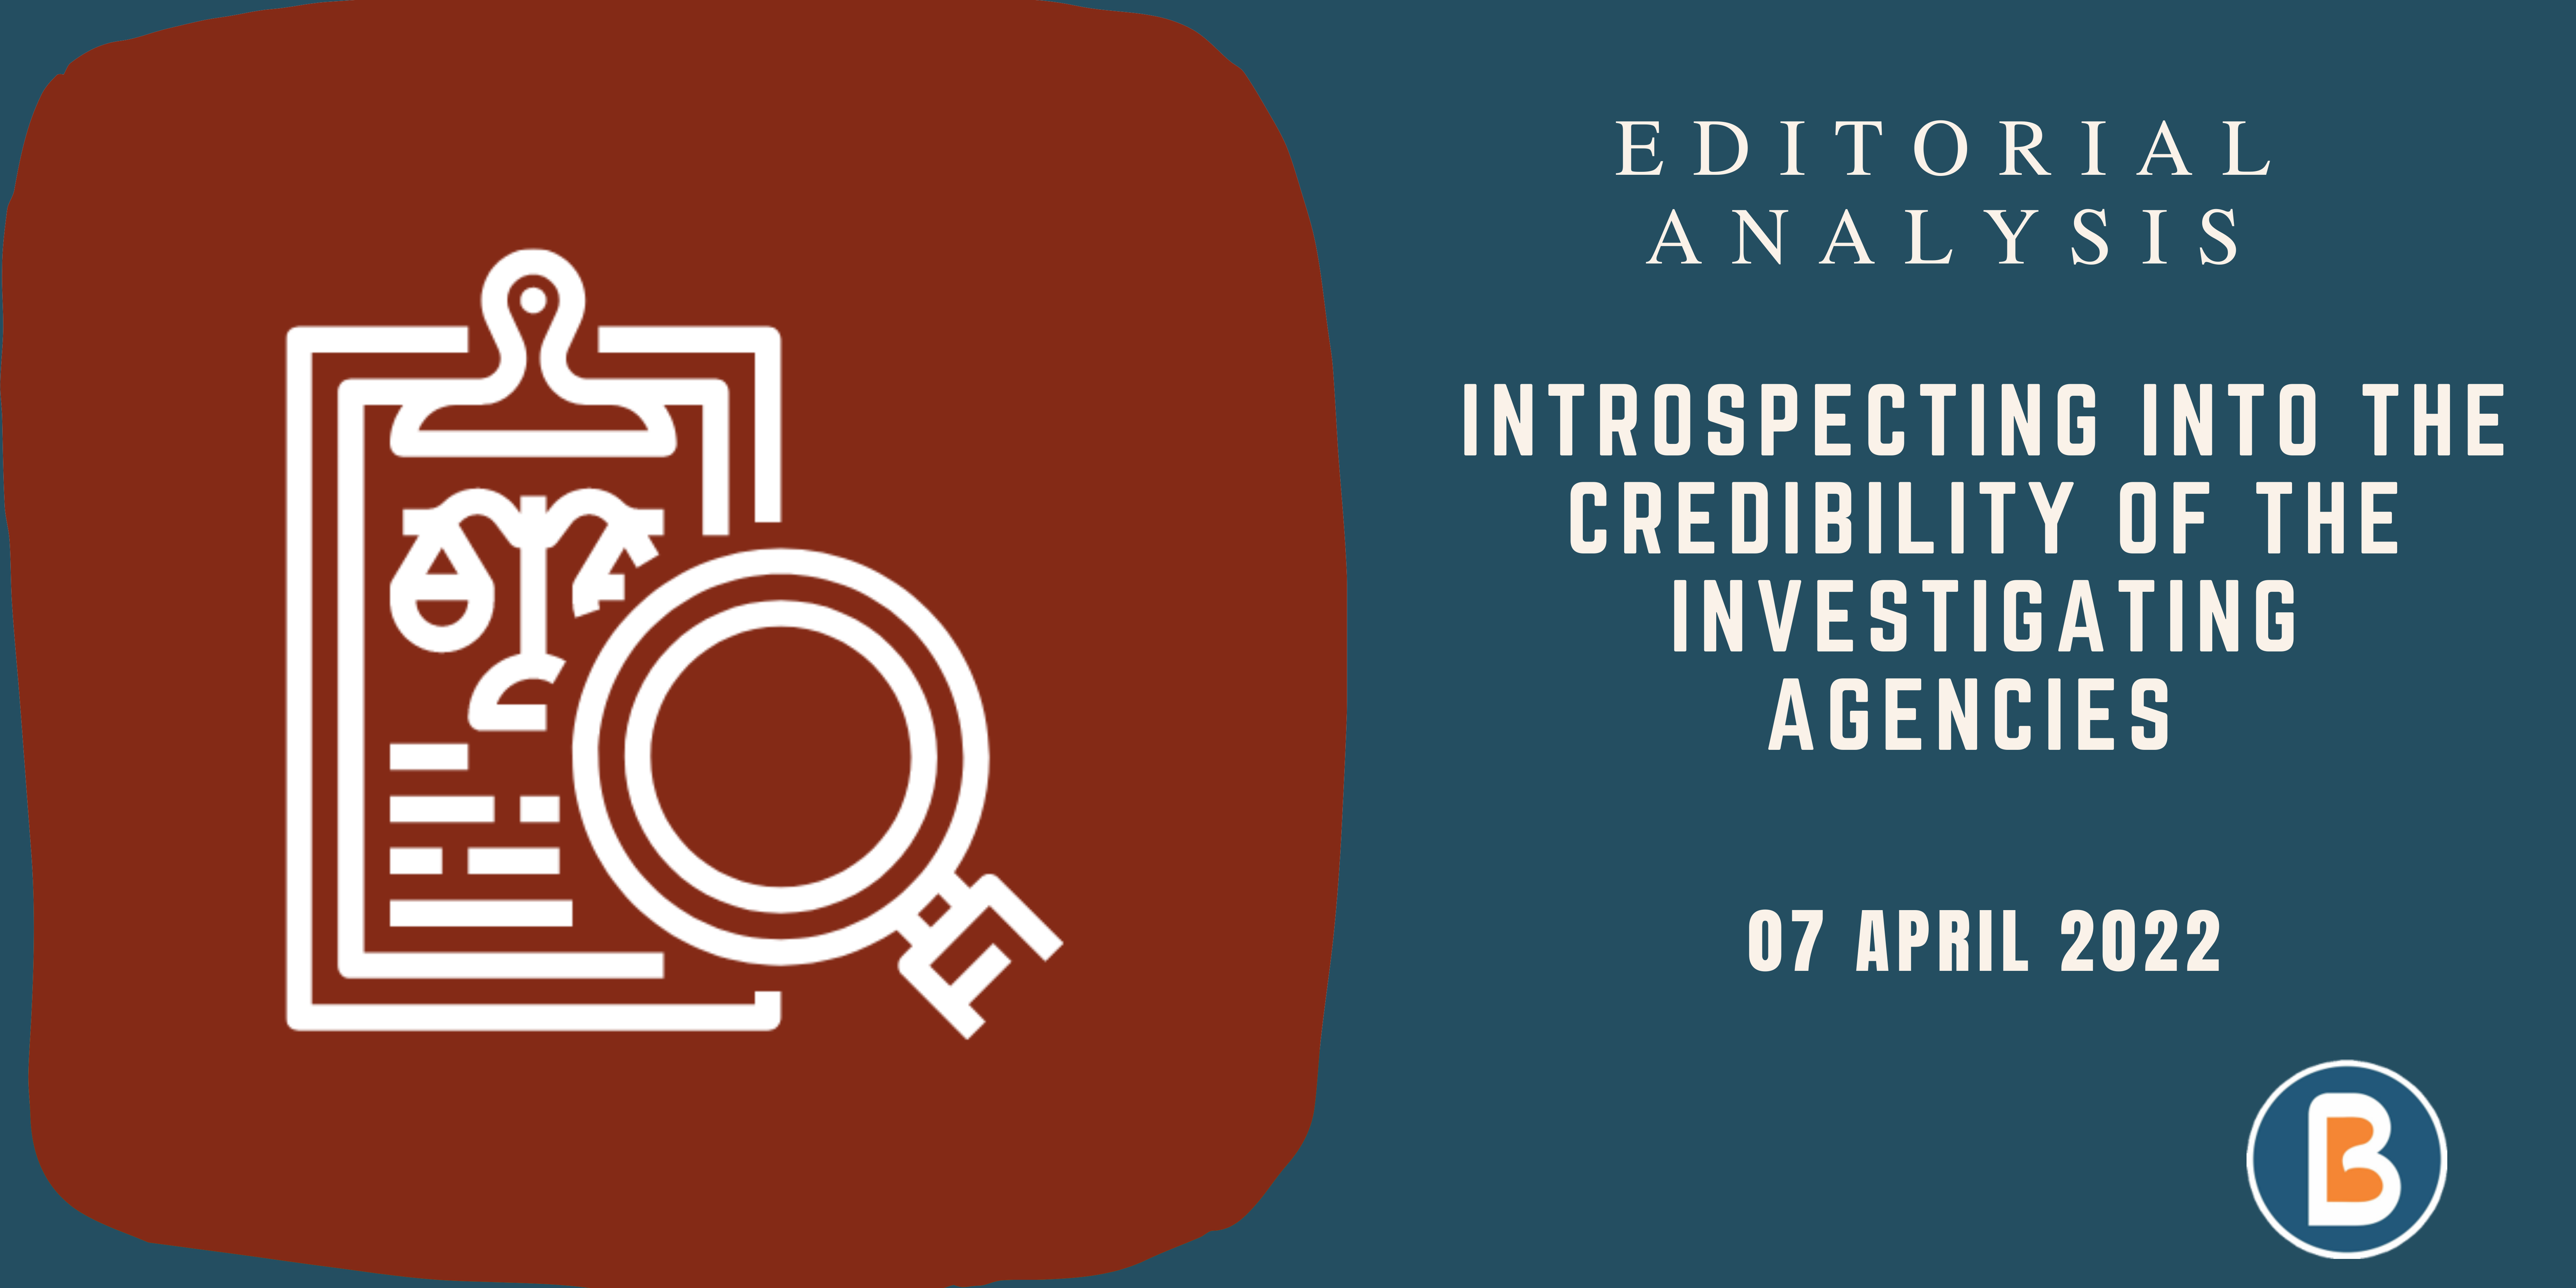 Editorial Analysis for UPSC - Introspecting into the credibility of the Investigating Agencies